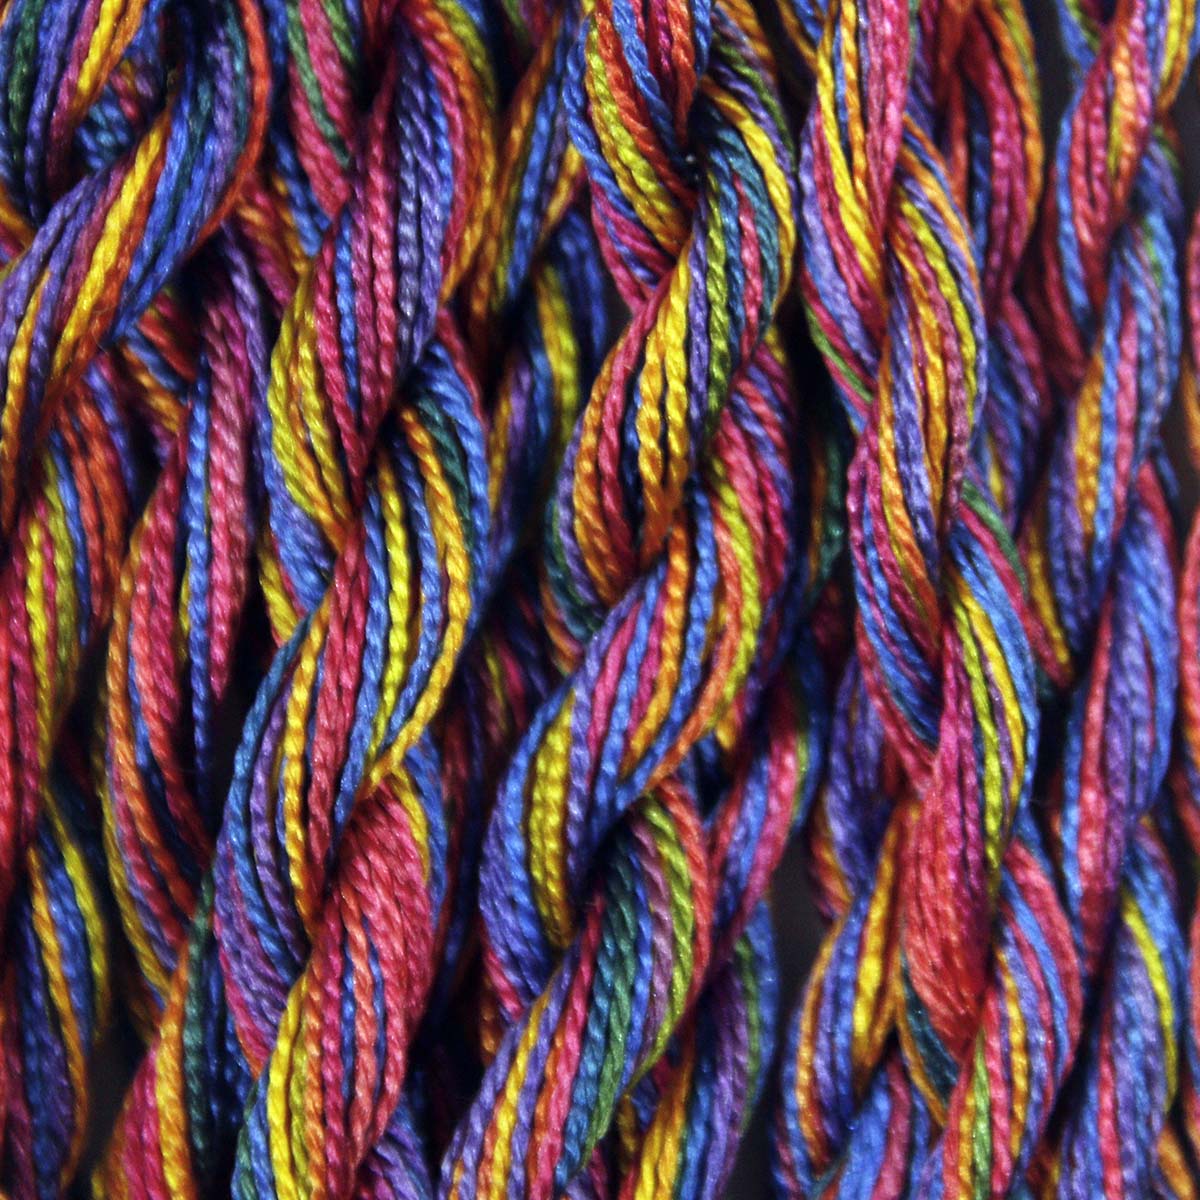 www.colourstreams.com.au Colour Streams Hand Dyed Silk Threads Silken Strands Ophir Exotic Lights Aurora Slow Stitch Embroidery Textile Arts Fibre DL  67 Reds Purples Blues Yellows Oranges Greens